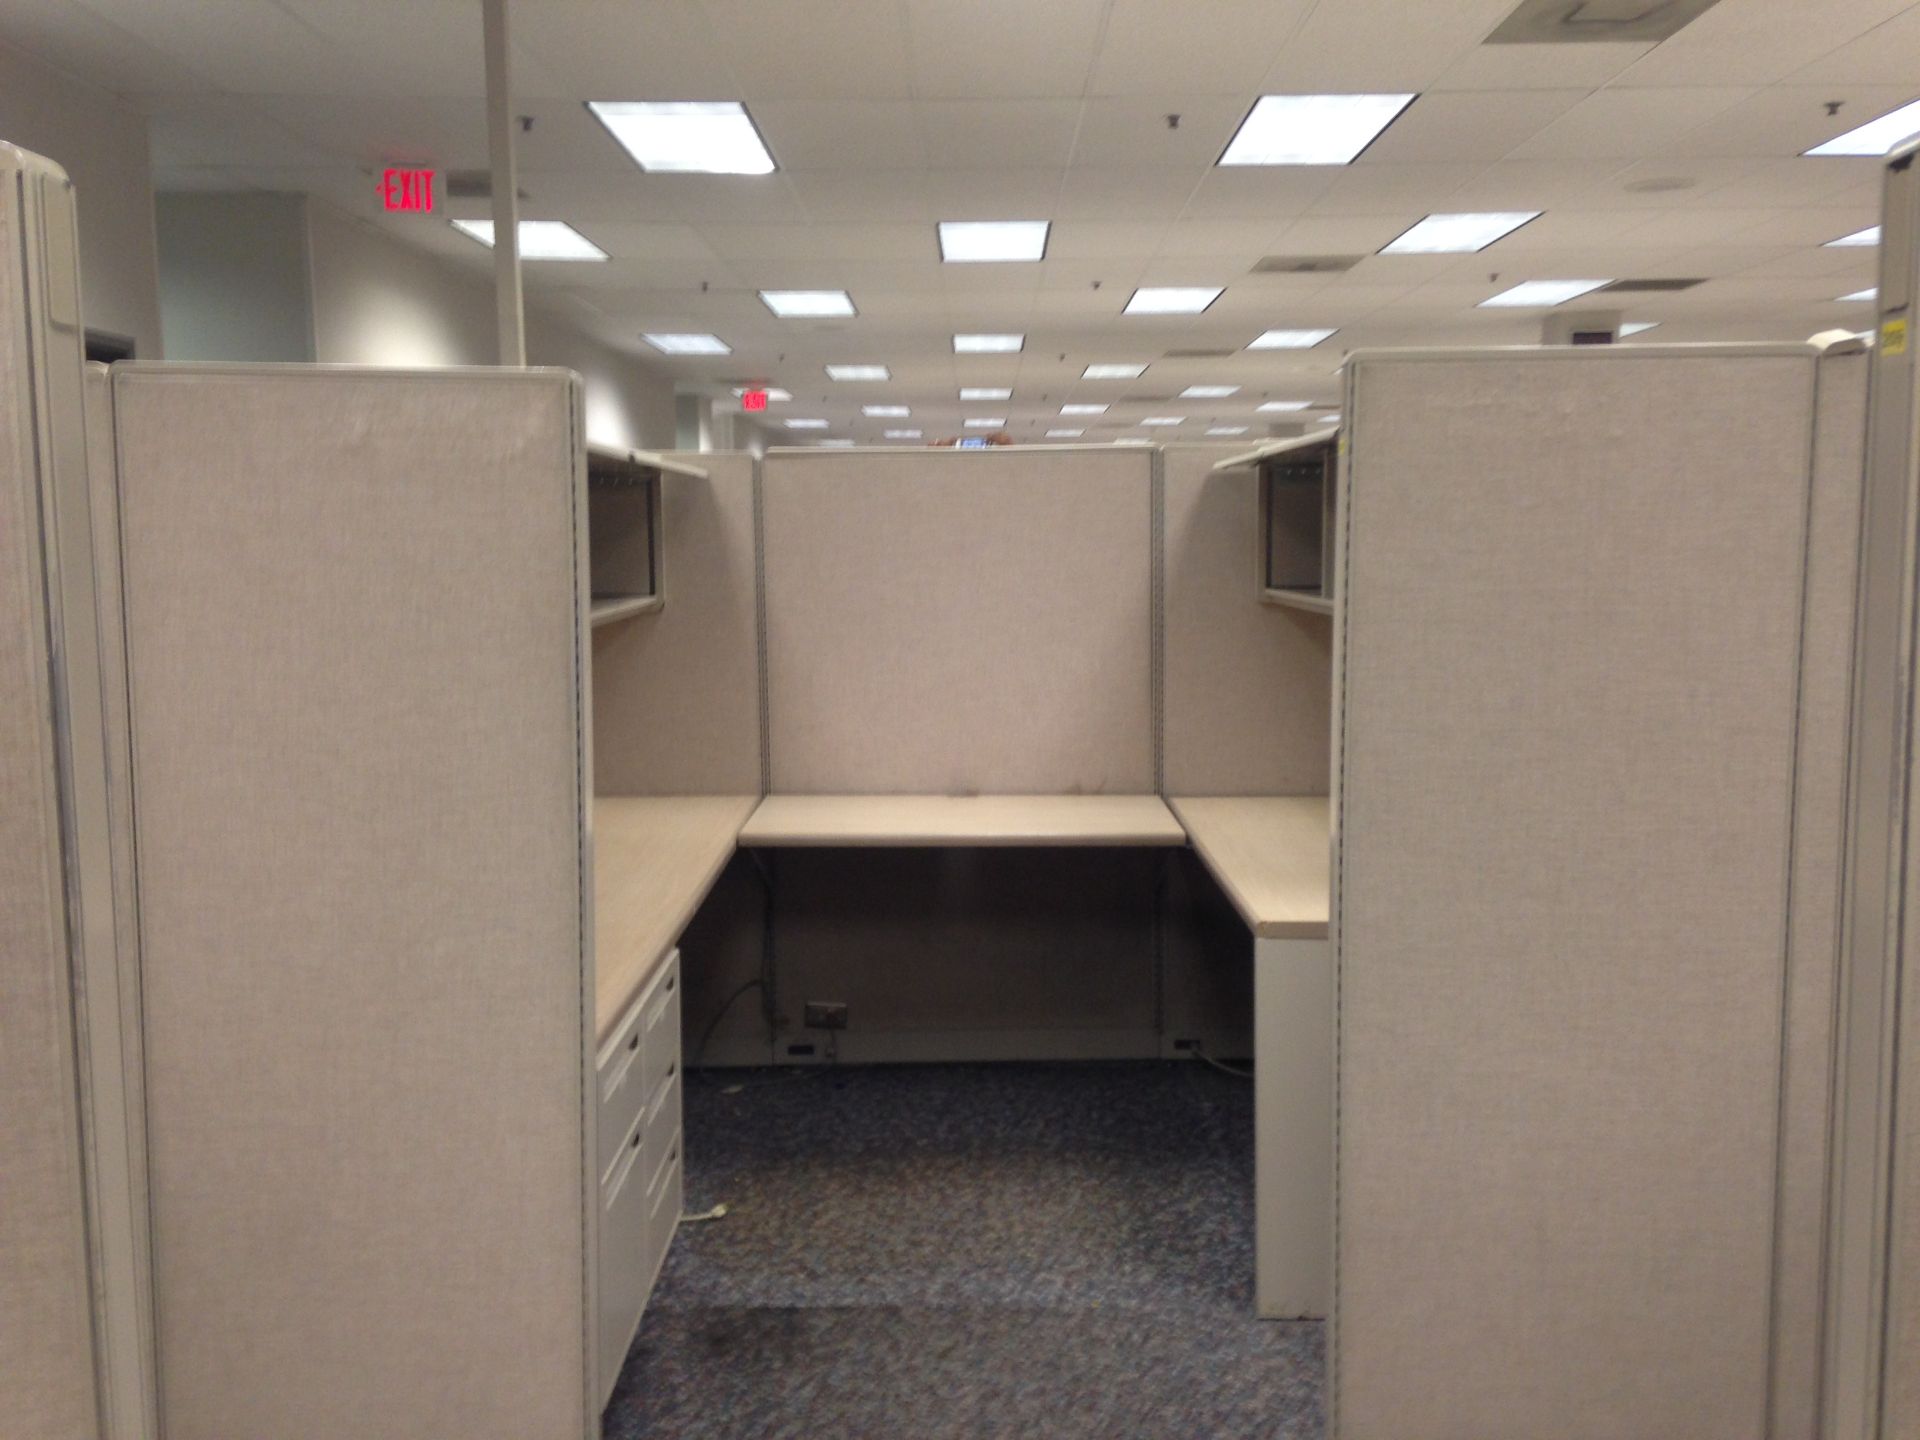 LOT OF 5 OFFICE CUBICLE SYSTEM (CHECK DRAWING AND PICTURES FOR MORE DETAILS) - Image 3 of 4